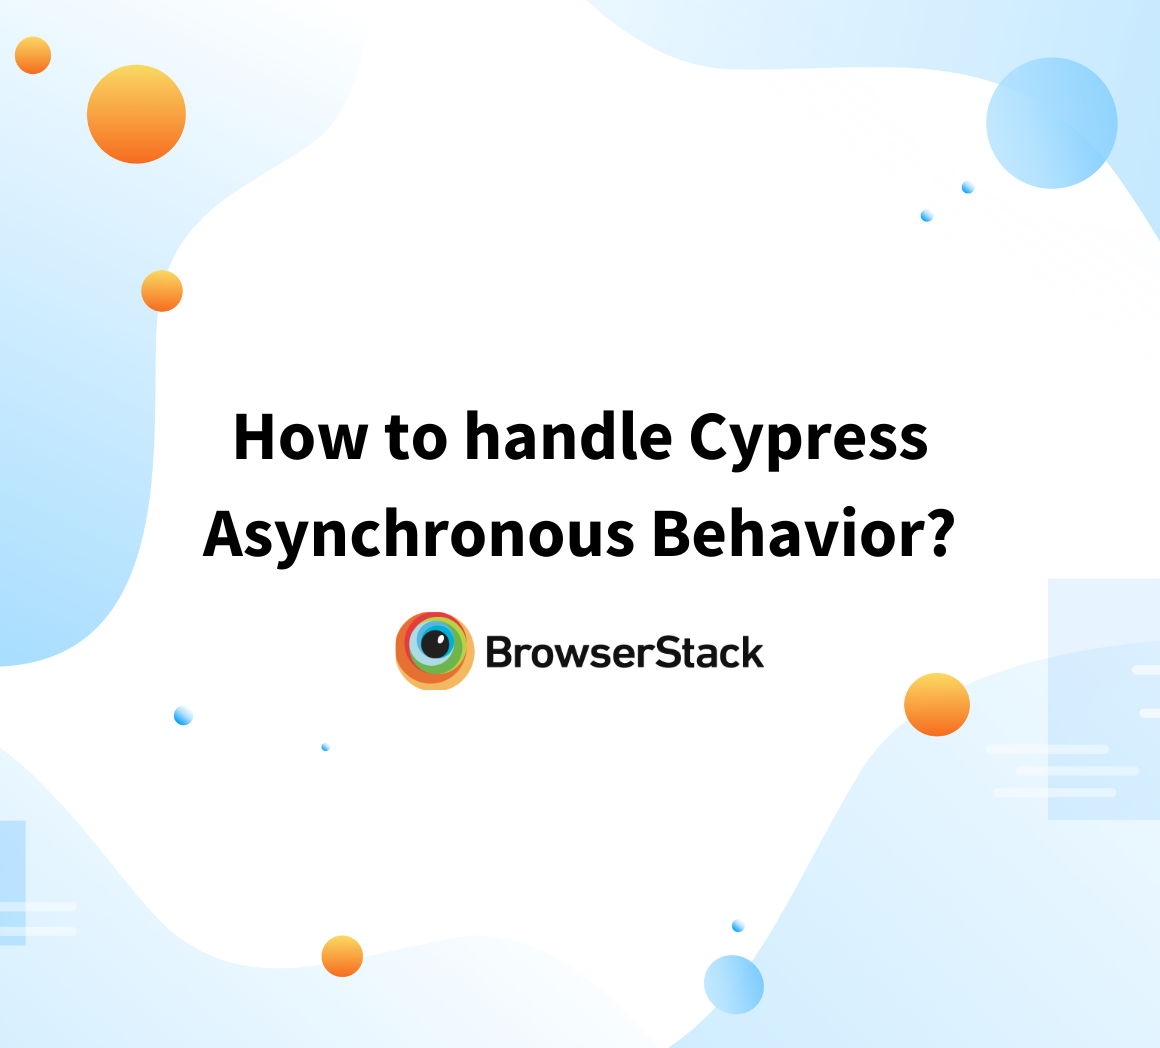 How to handle Cypress Asynchronous Behavior